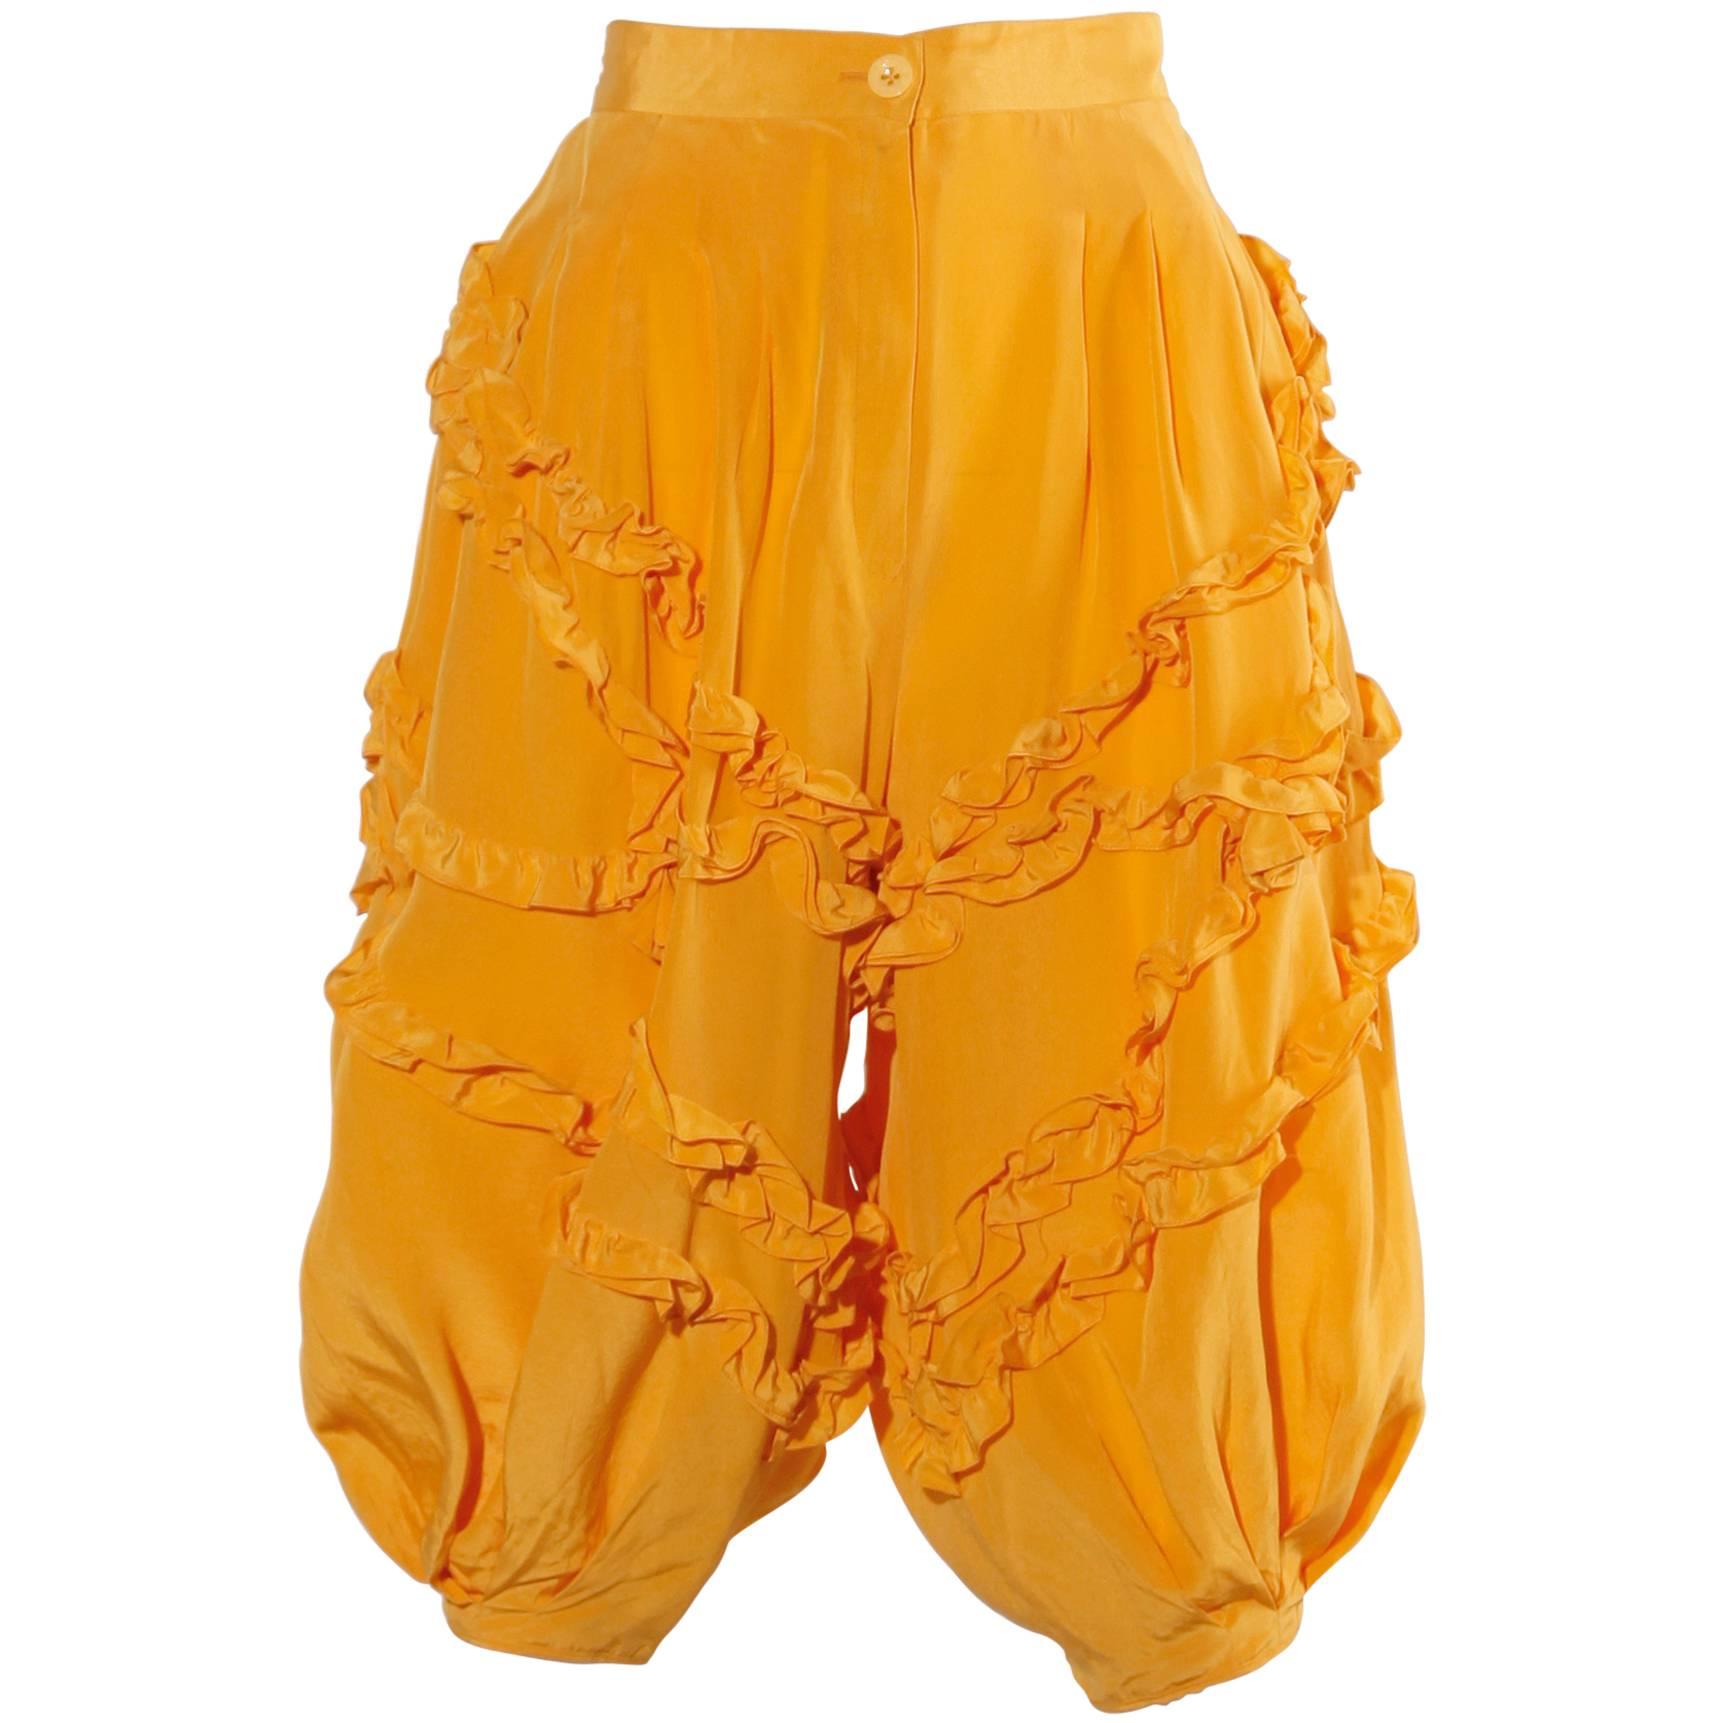 1980s Paco Rabanne Vintage Yellow Silk Culottes or Cropped Capri Pants